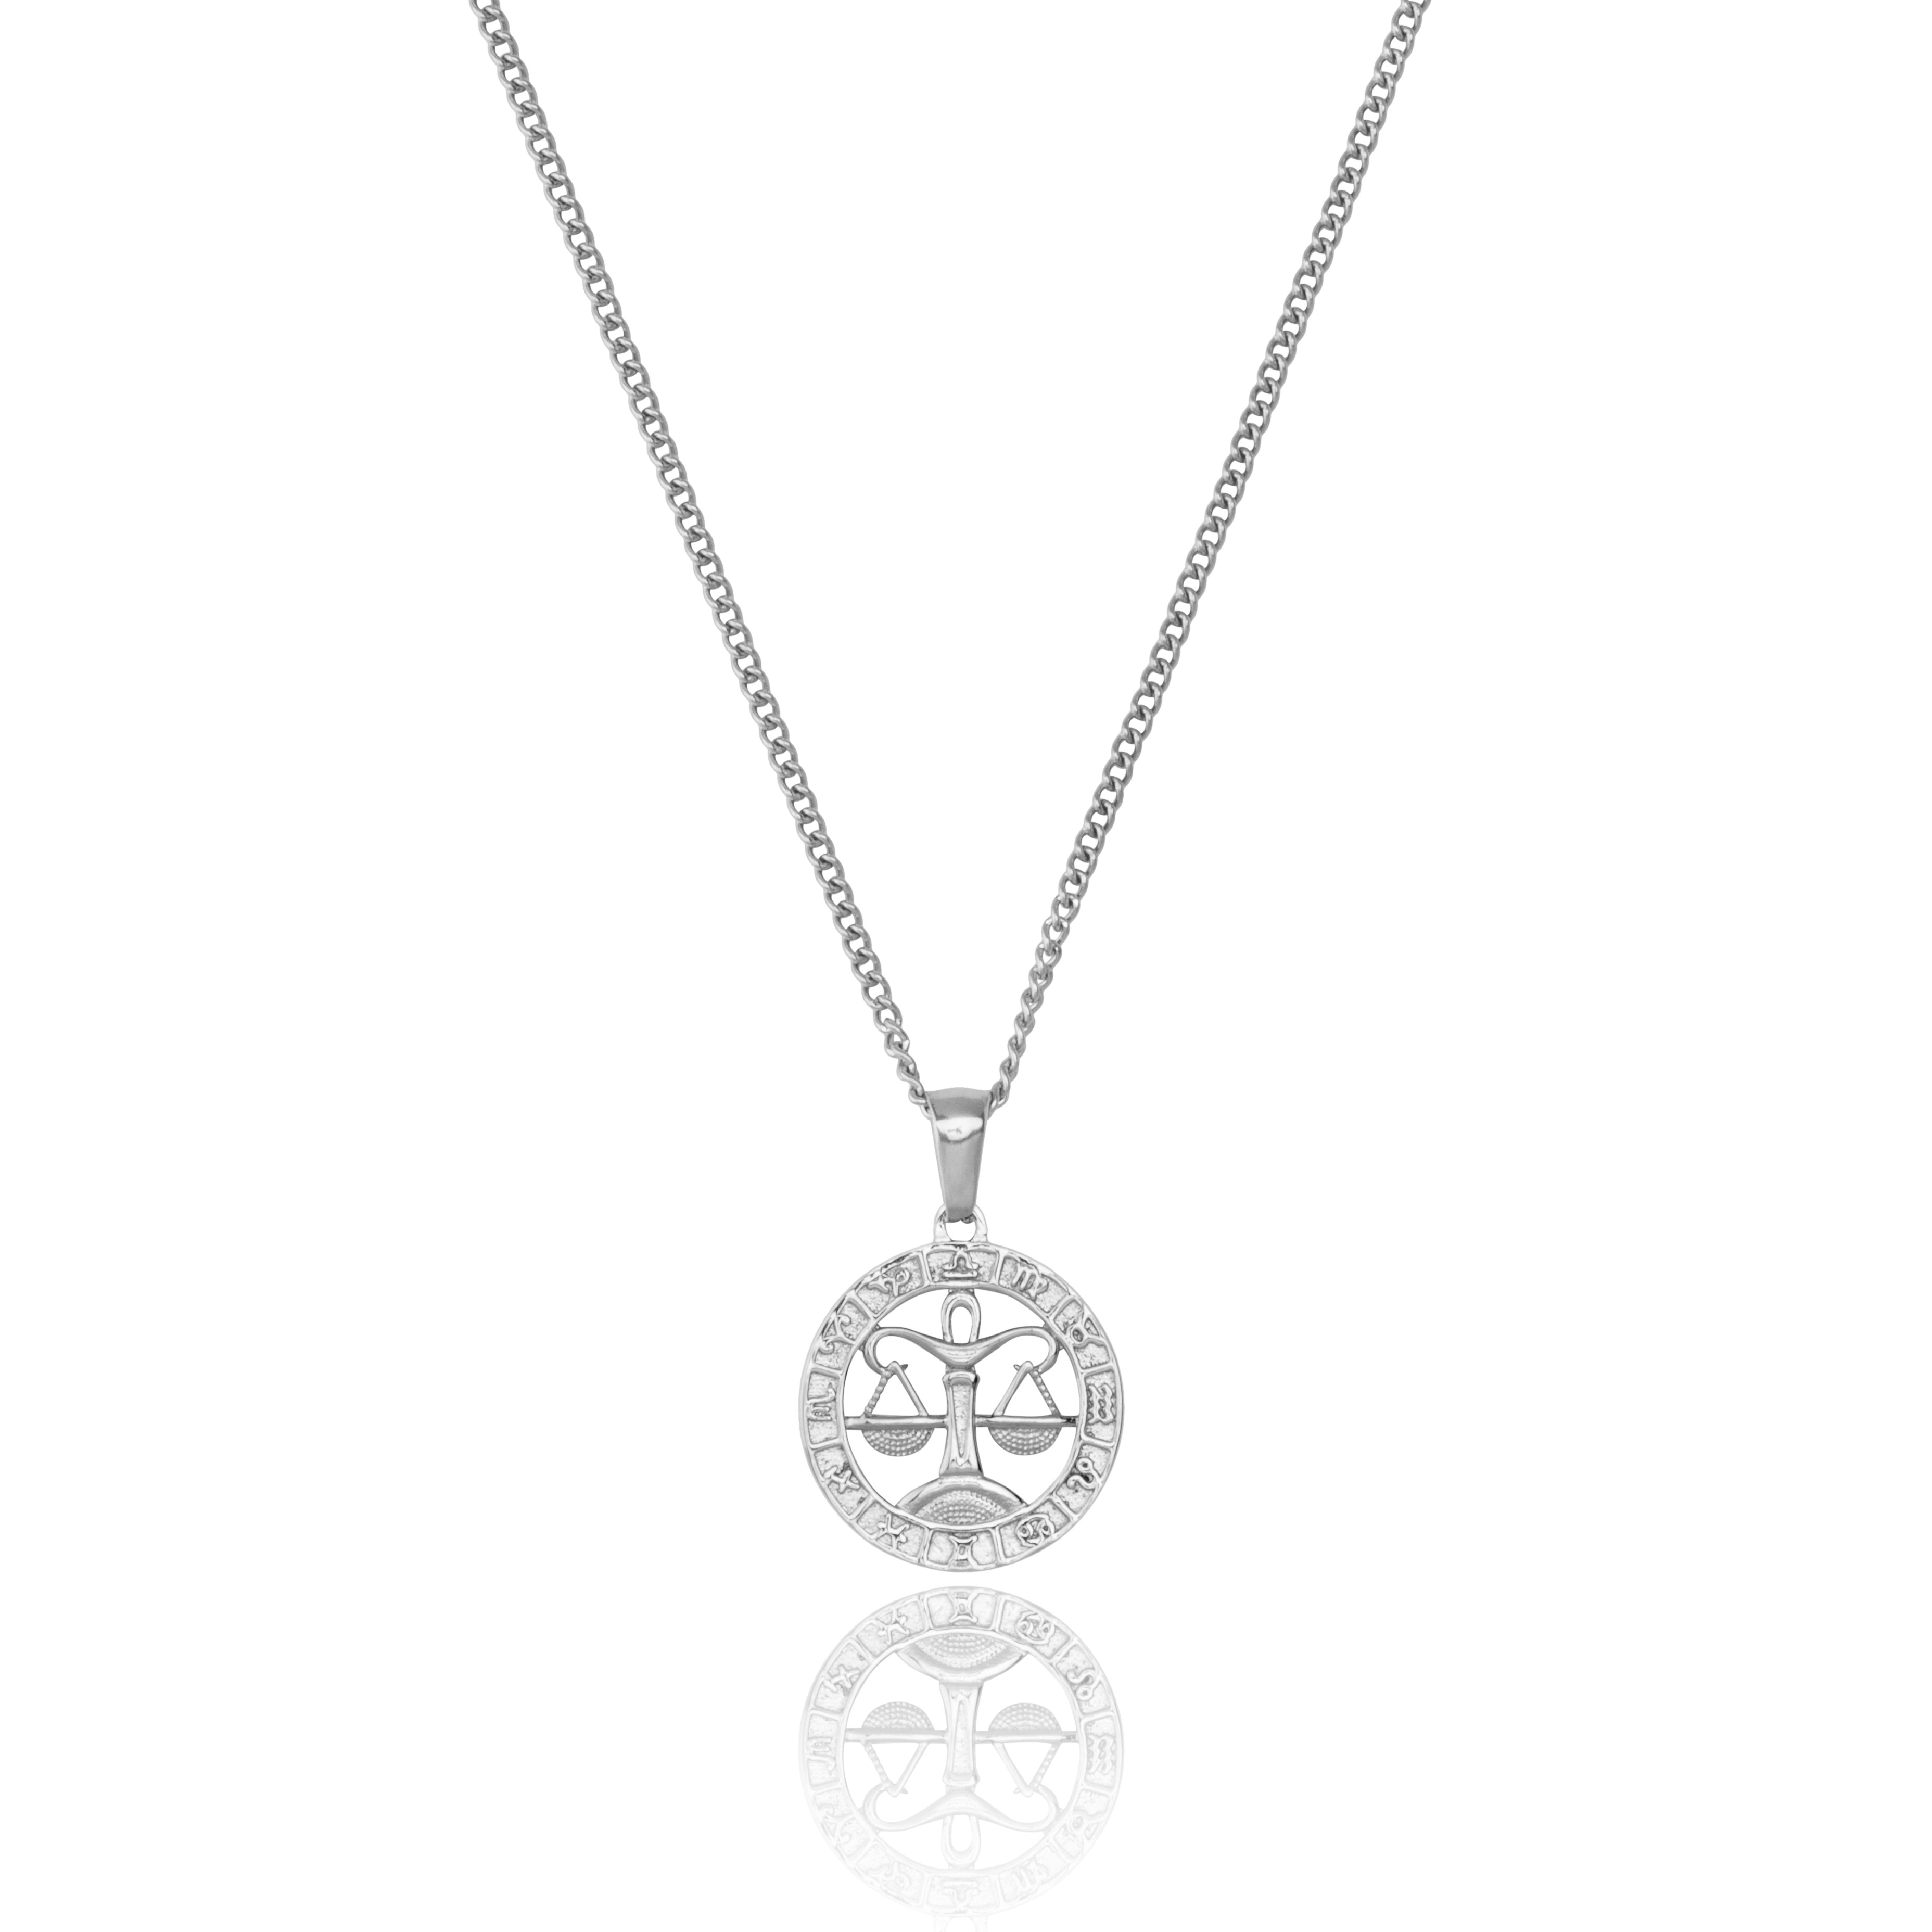 Stainless Steel Libra Zodiac Sign Pendant and Chain